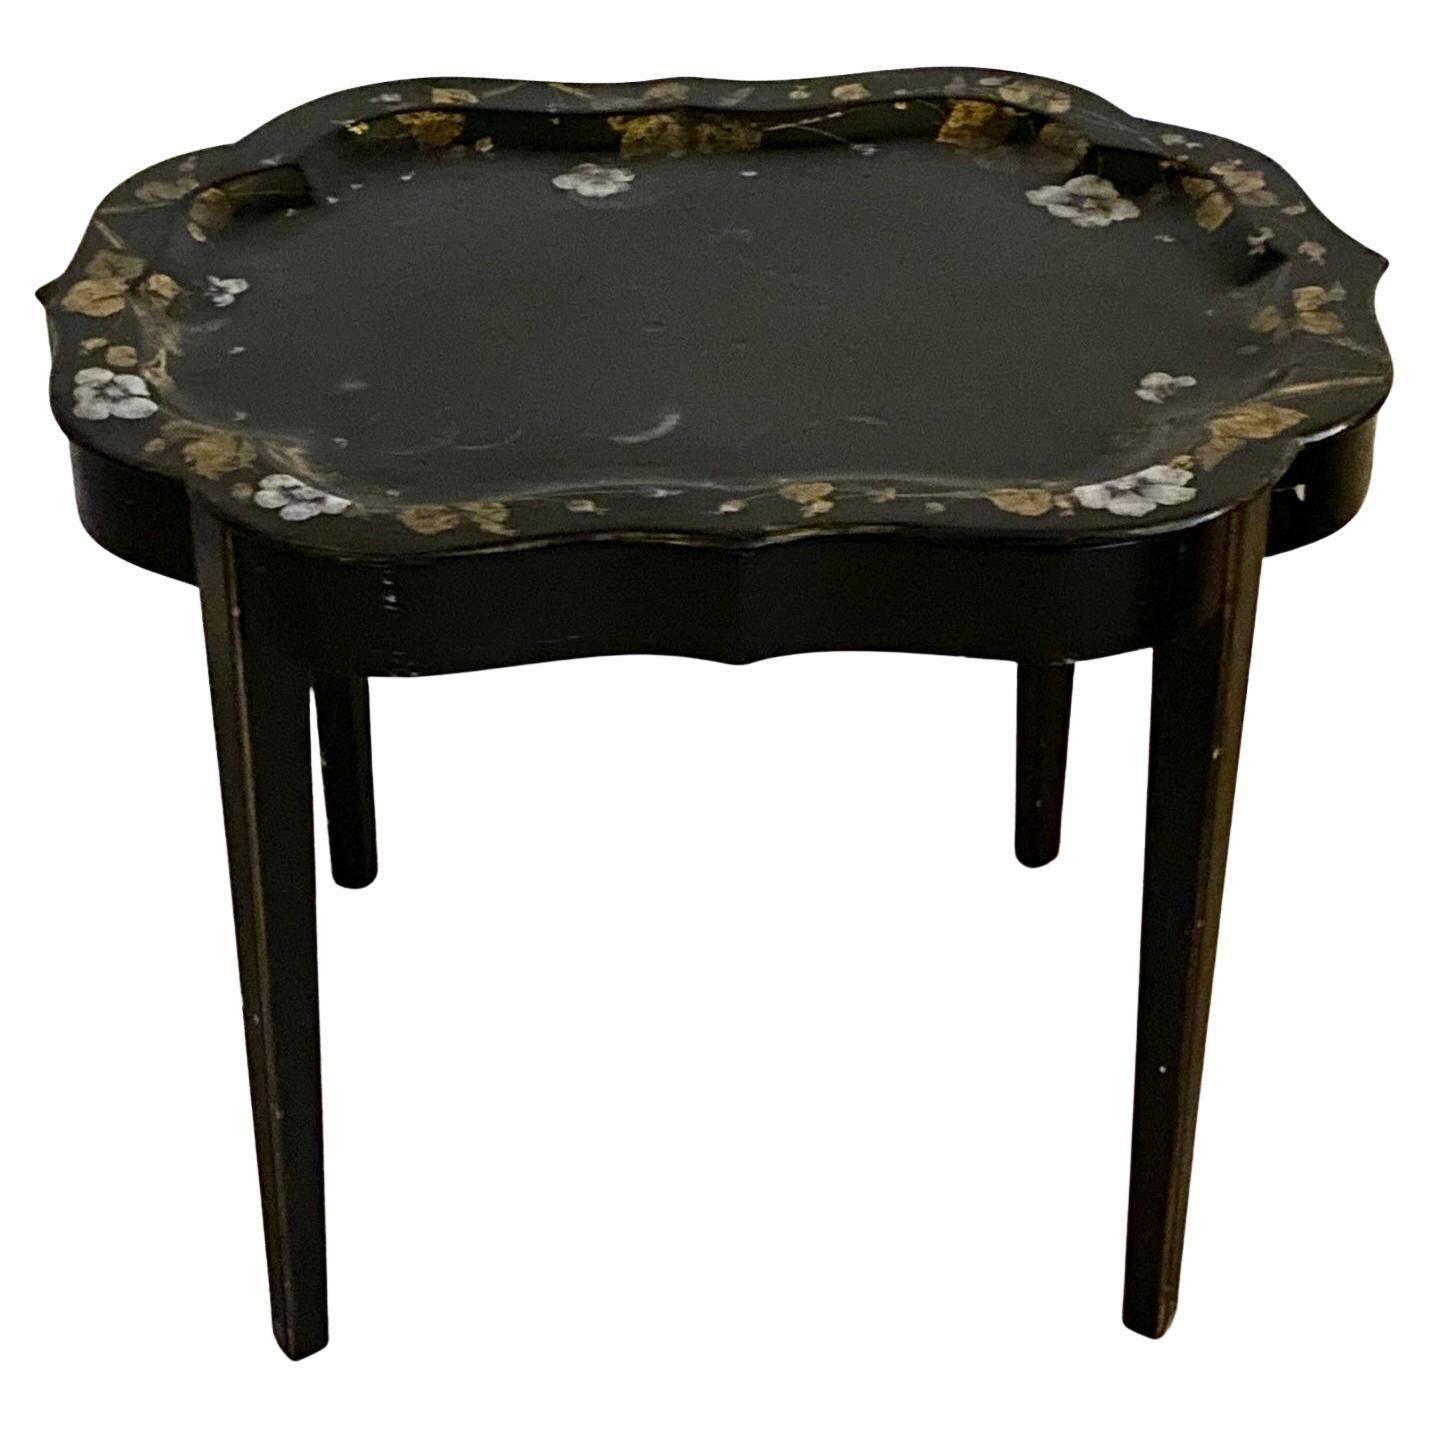 Danish Black-Painted Flower Decorated Coffee Tray Table, circa 1920s For Sale